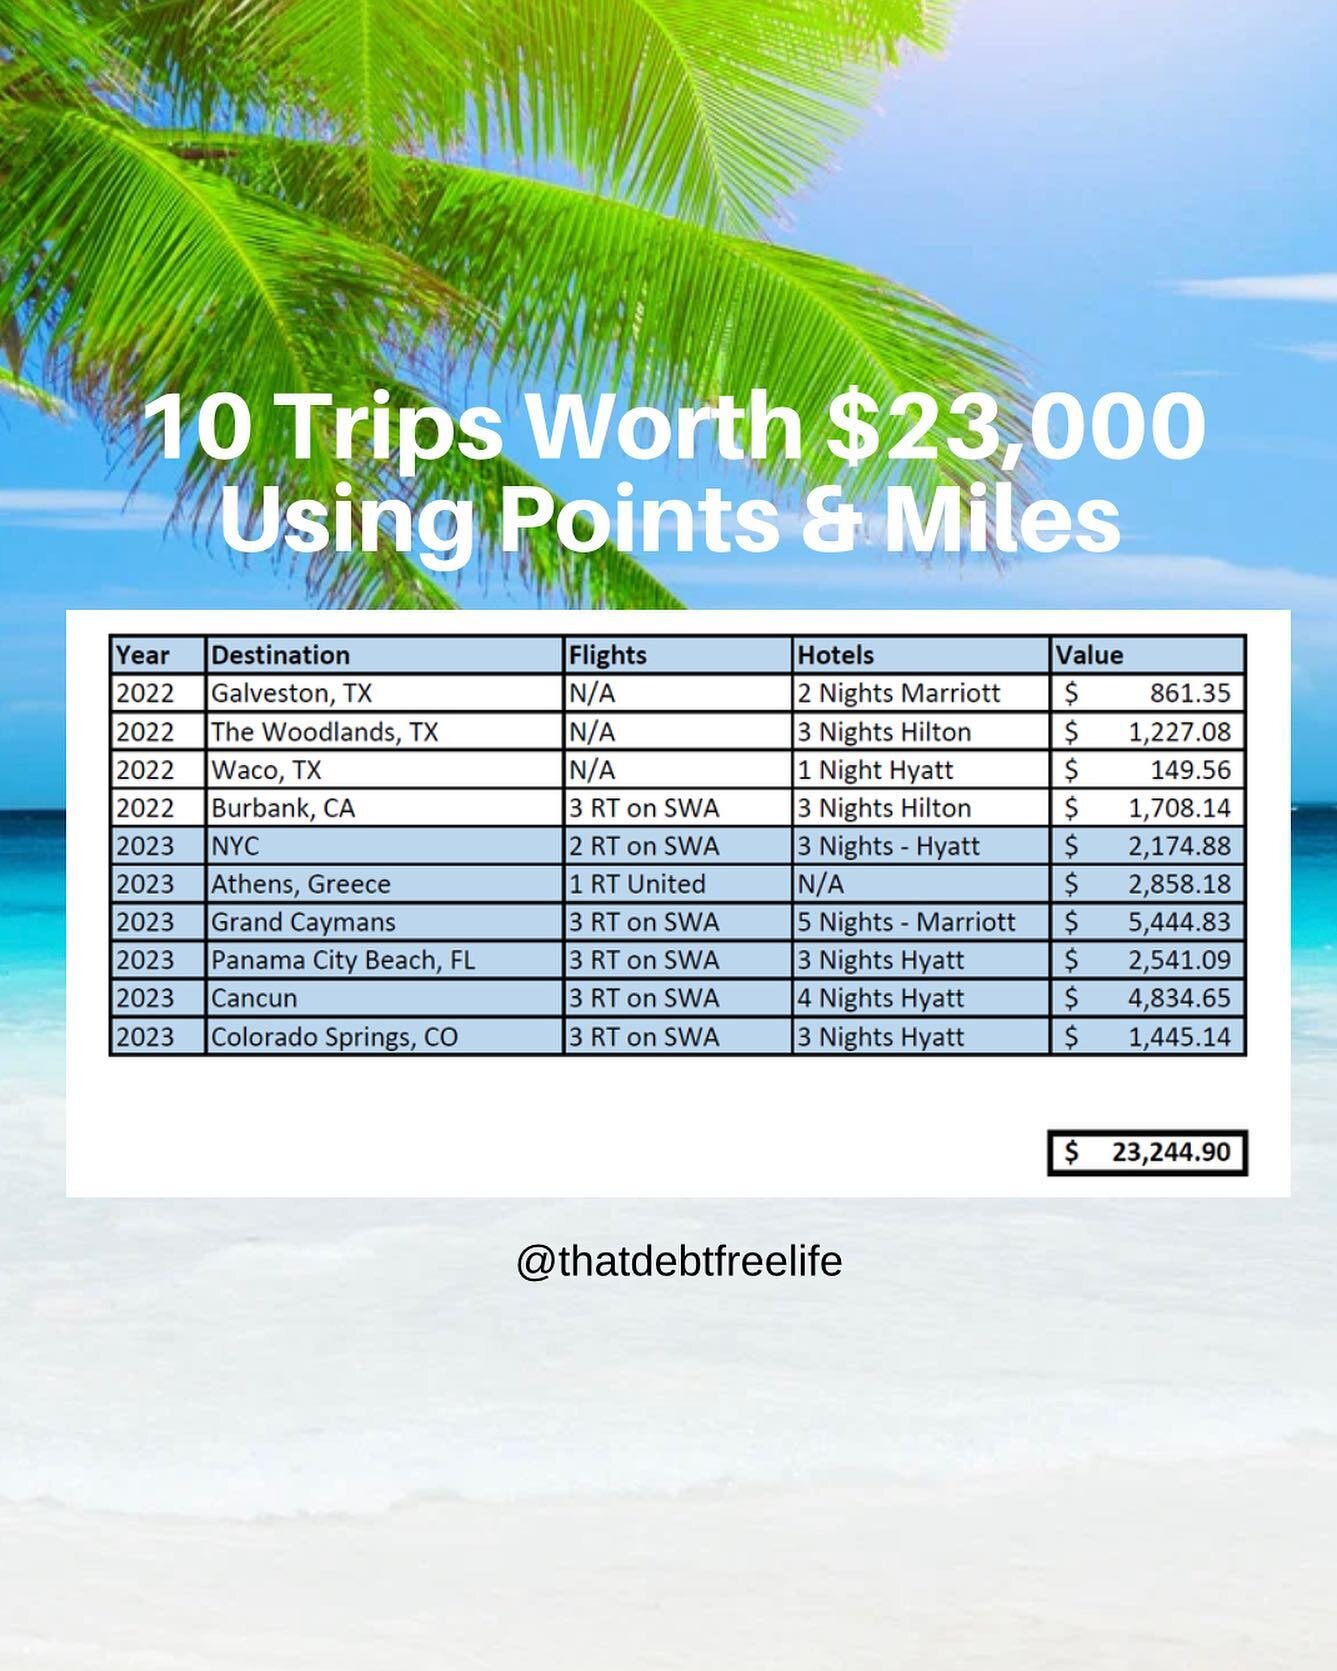 Inspired by one of my IG besties, @aunt.kara, I made a list of all the trips i hacked in 2022 and what&rsquo;s on deck for 2023. 

$23,000 worth of travel in 2 years!! 

I never traveled like this before learning to travel hack. I&rsquo;ve been hacki